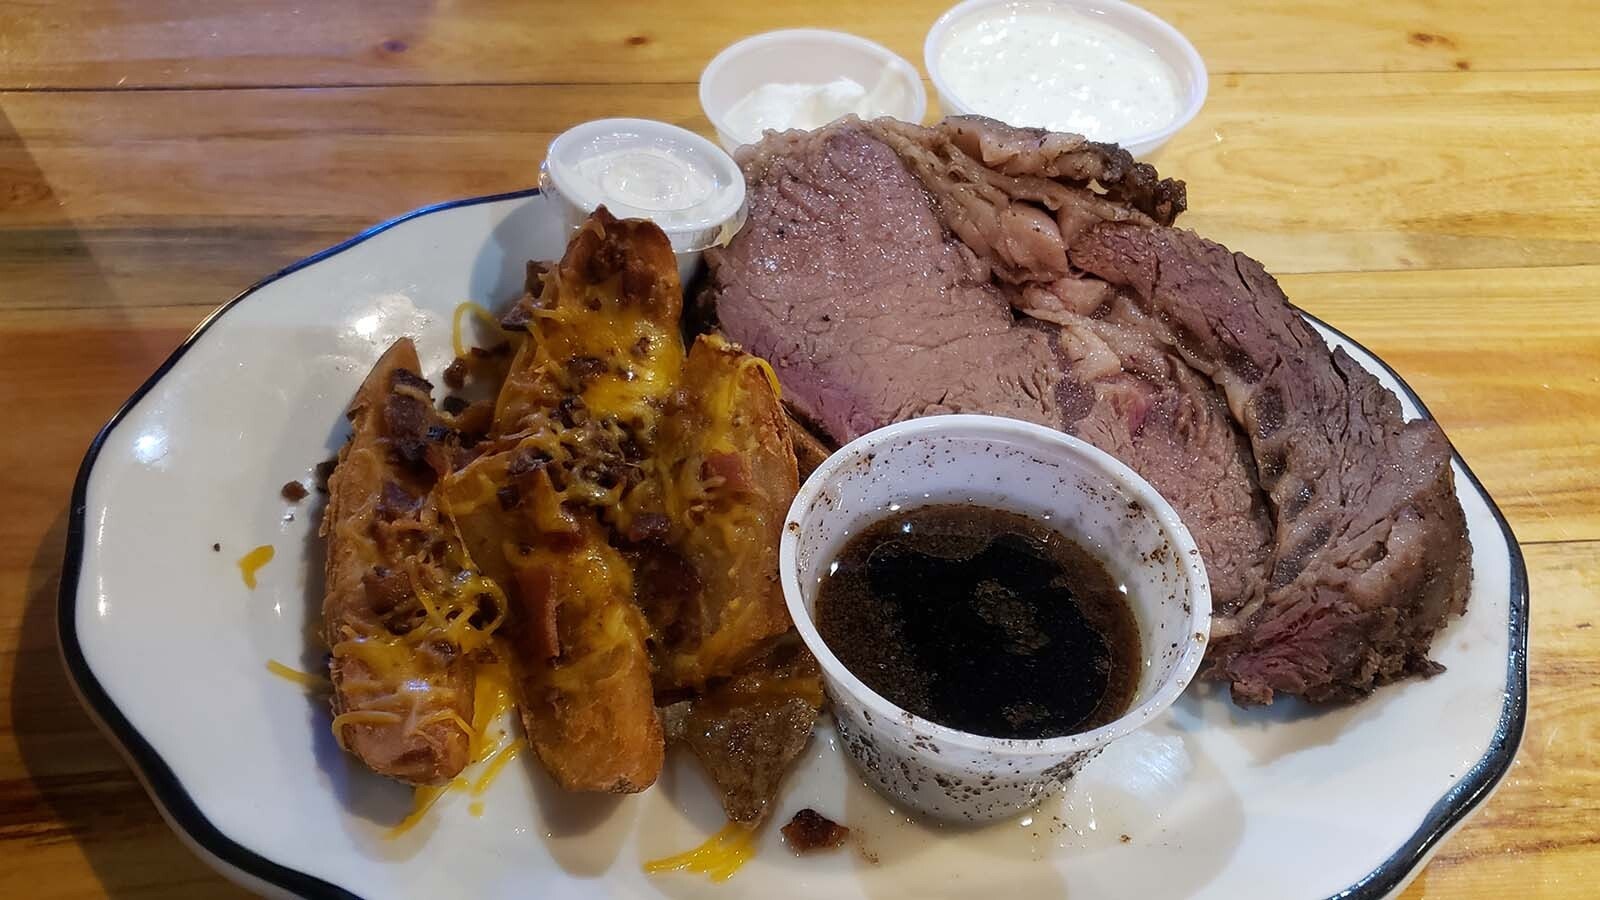 Prime rib with a side of potato skins.